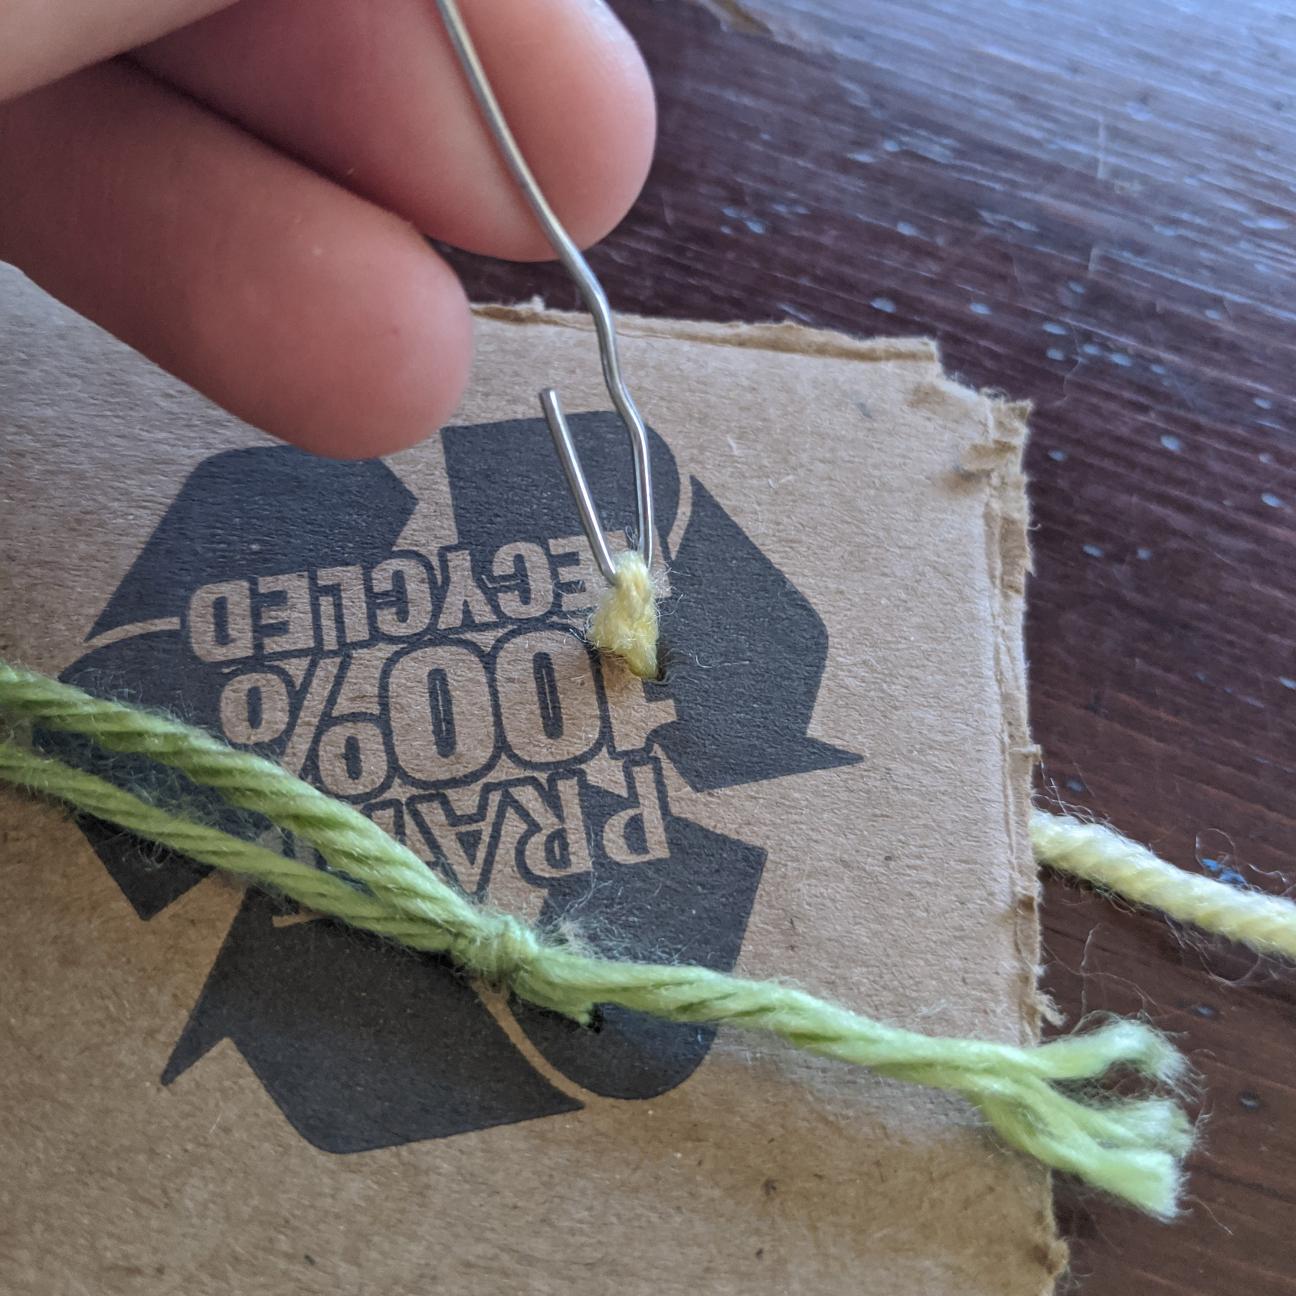 A strand of yarn that has been pulled through to the back of the cardboard using the paperclip hook.